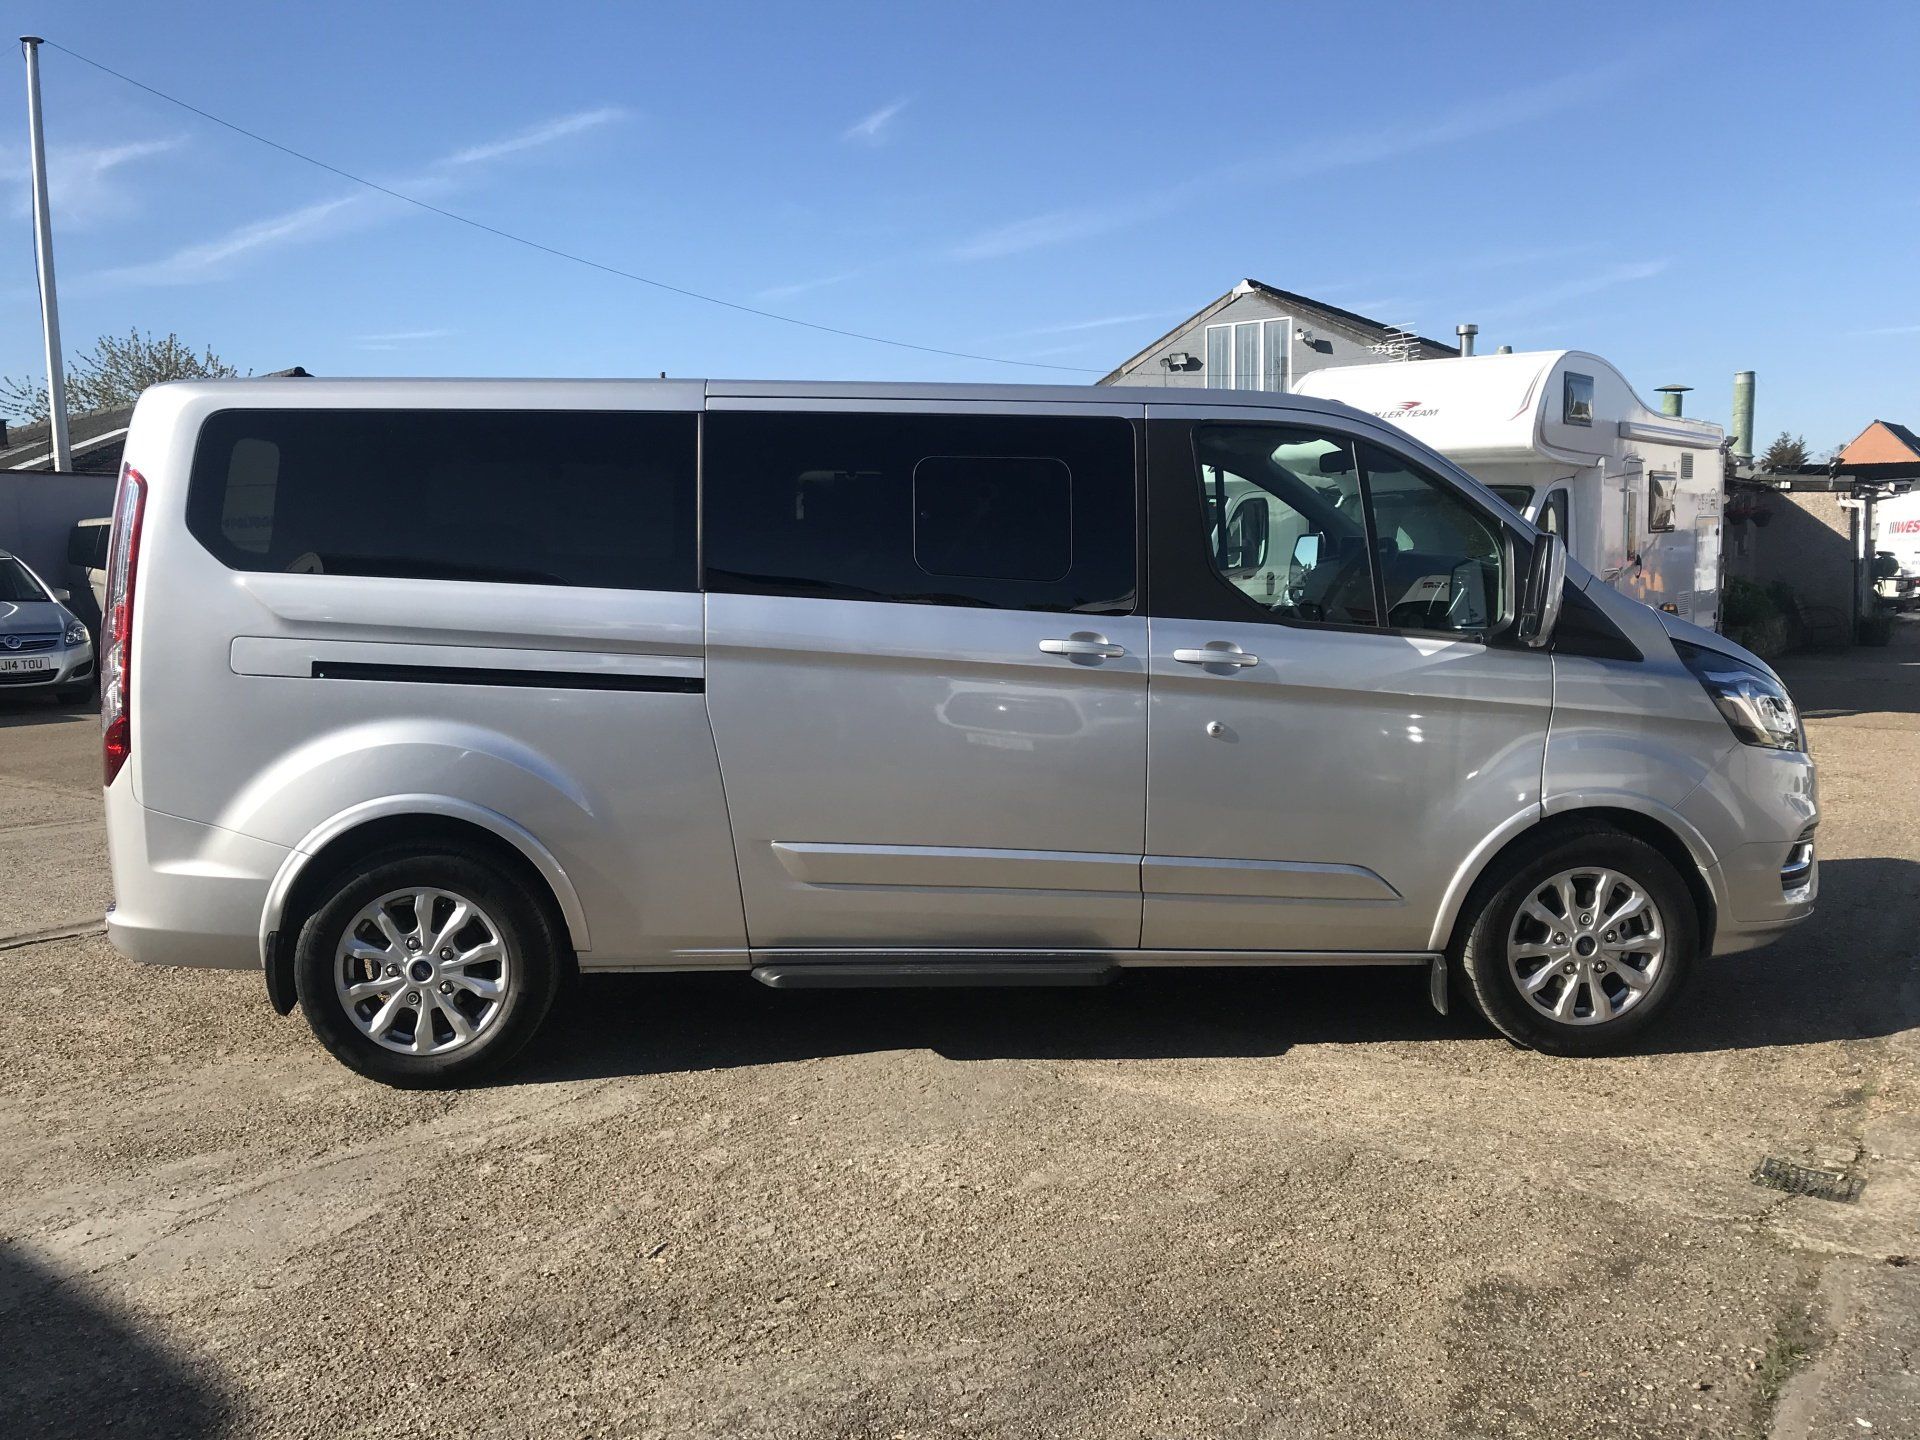 luxury 7, 8 and 9 seat minibus people carrier hire essex havering east london